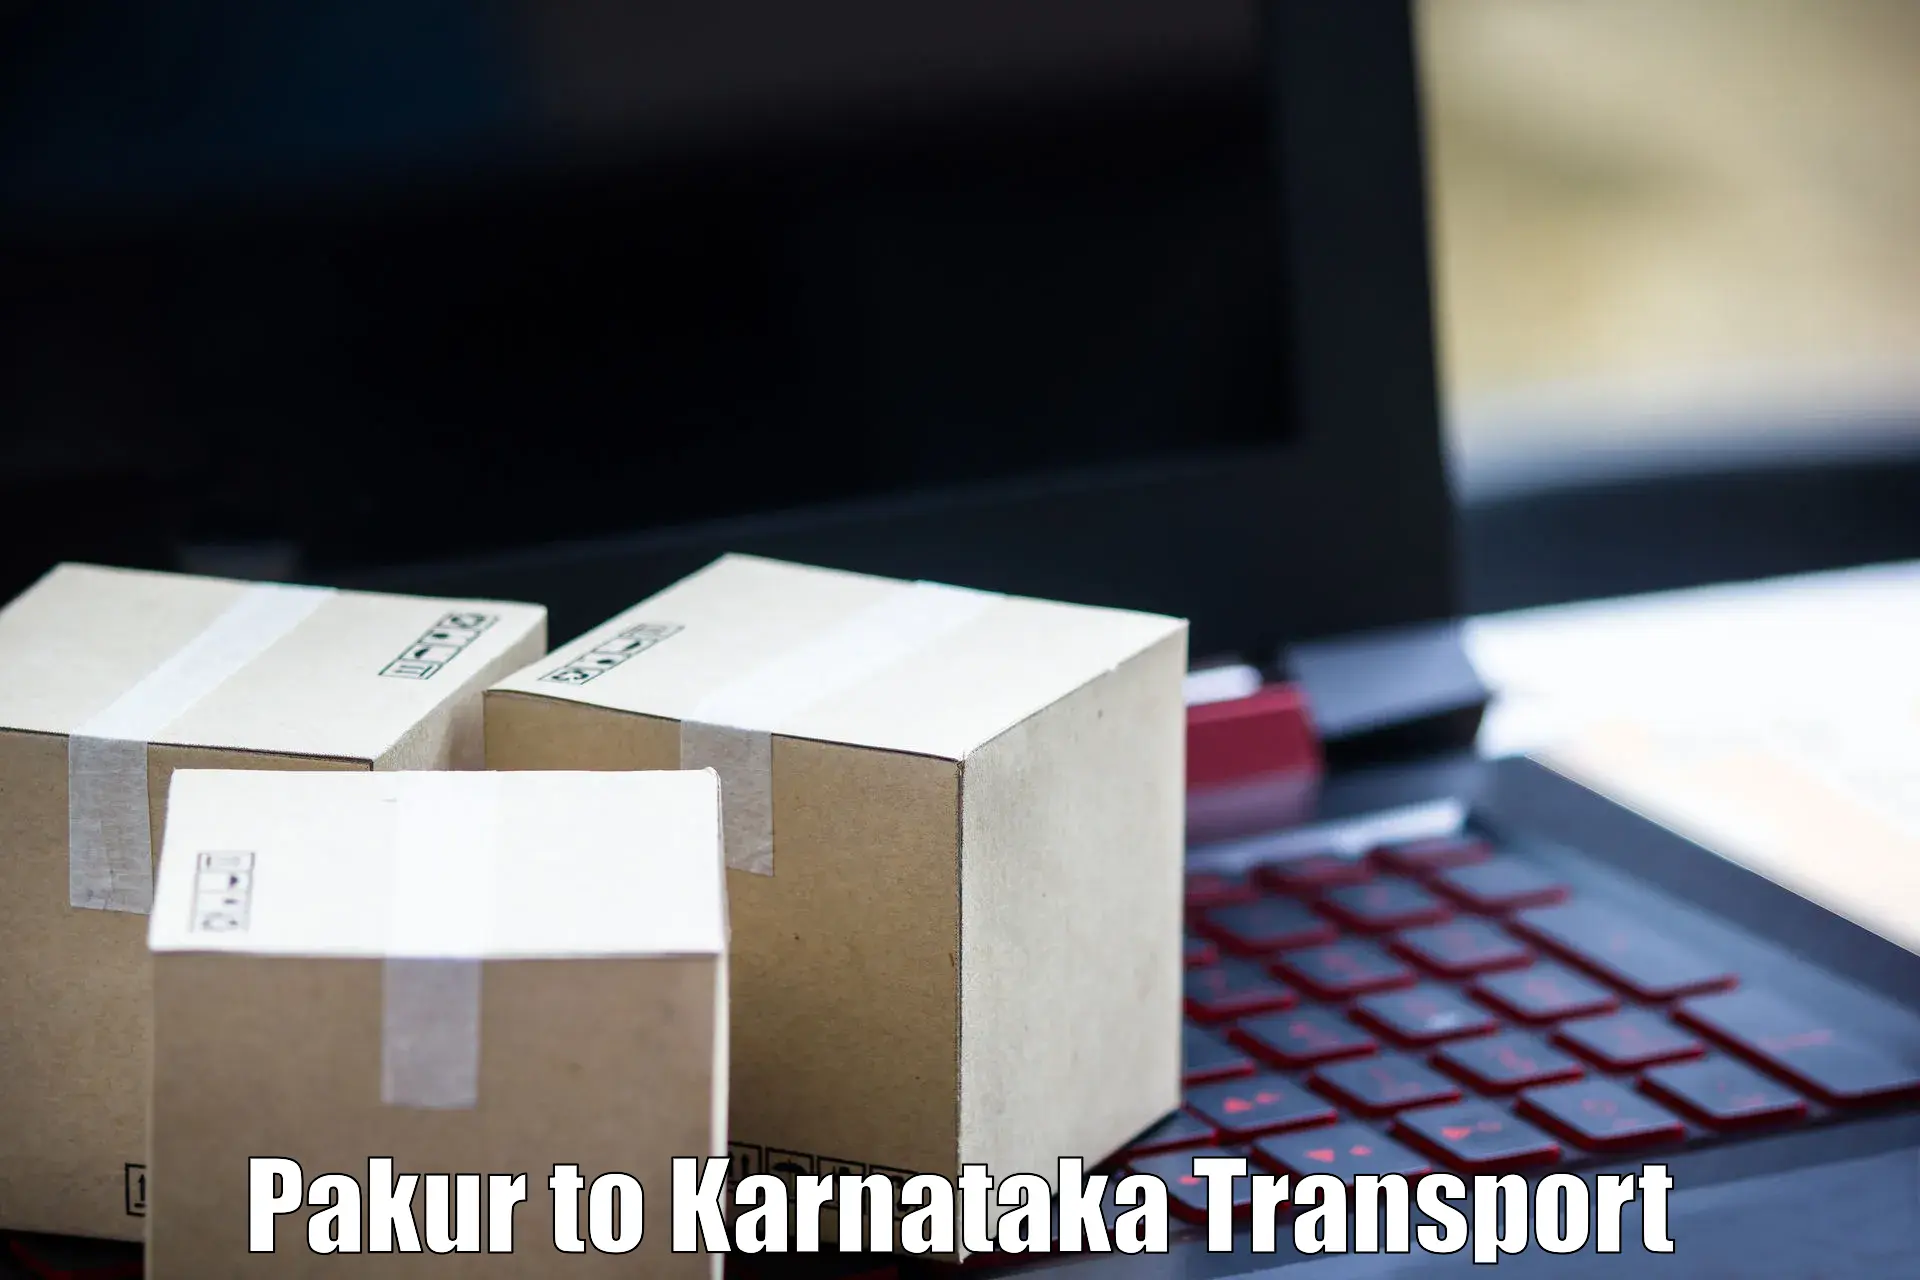 Transport shared services Pakur to Manipal